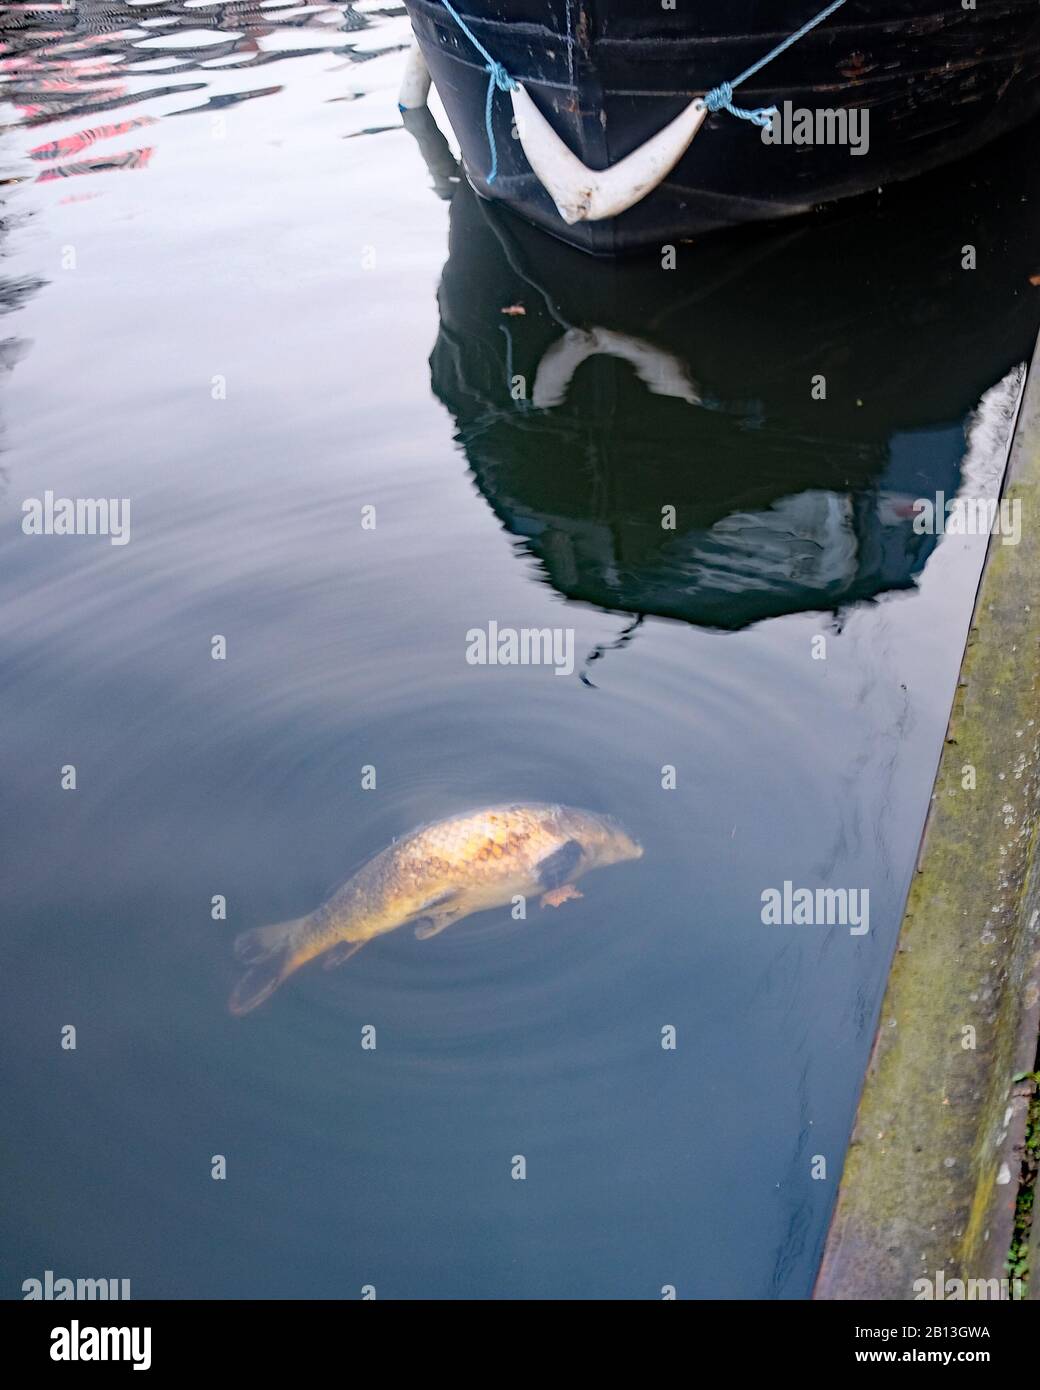 February 2020 - Large dead fish in the canal in Birmingham Stock Photo